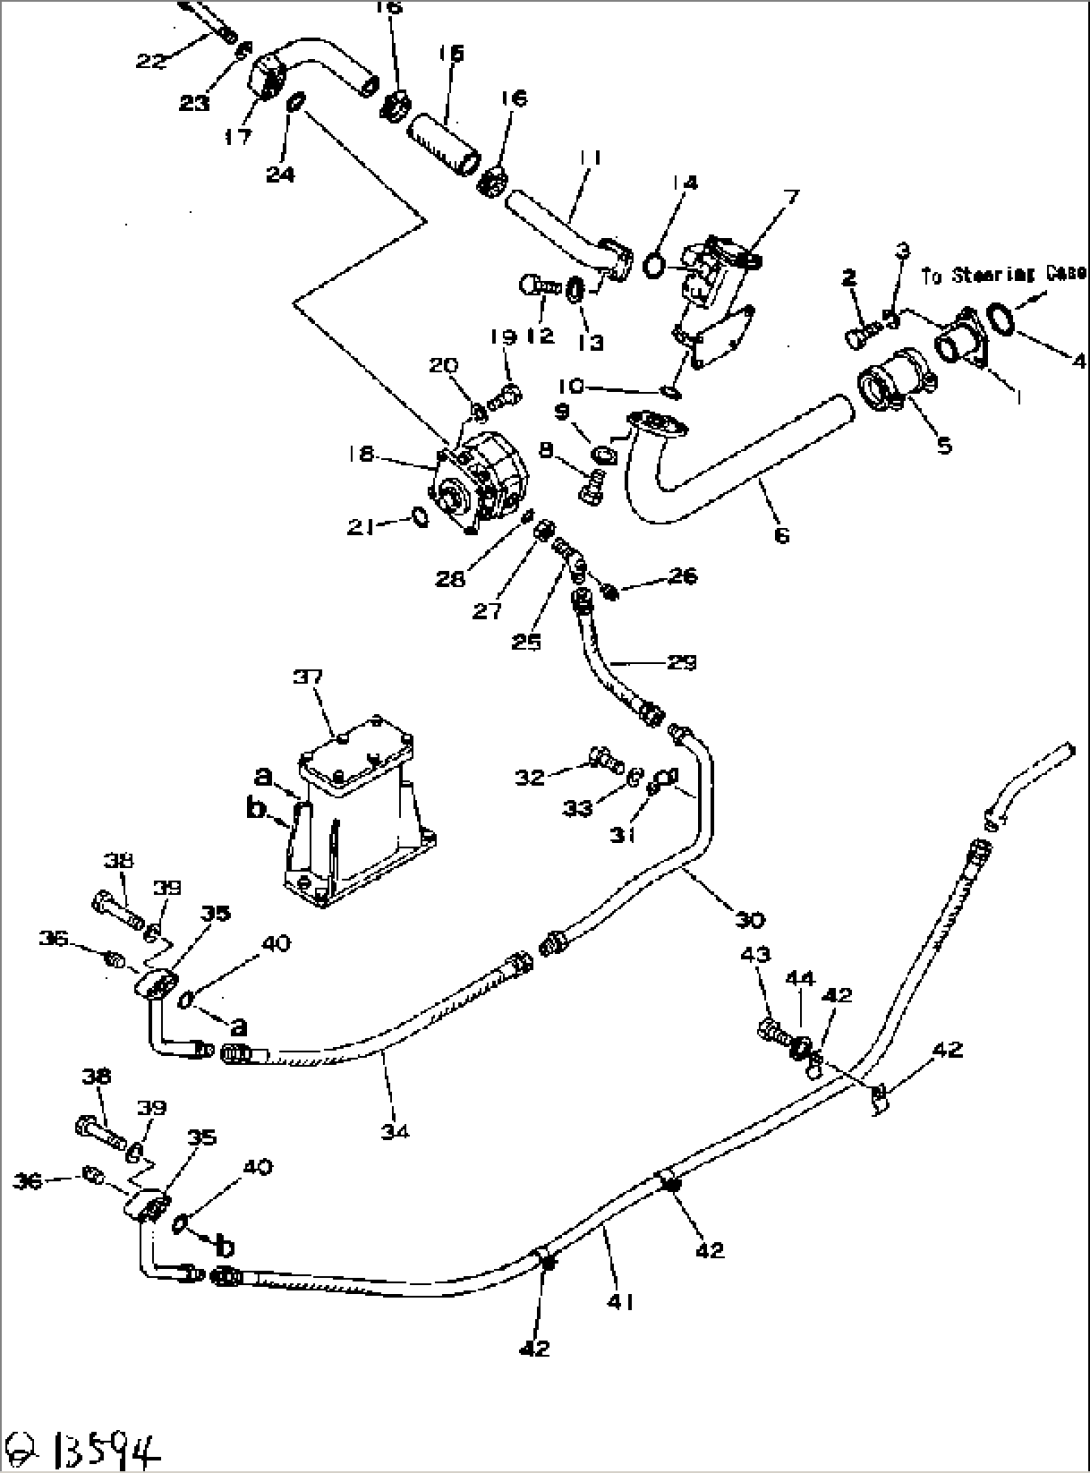 STEERING PIPING (1/2)(#4001-)